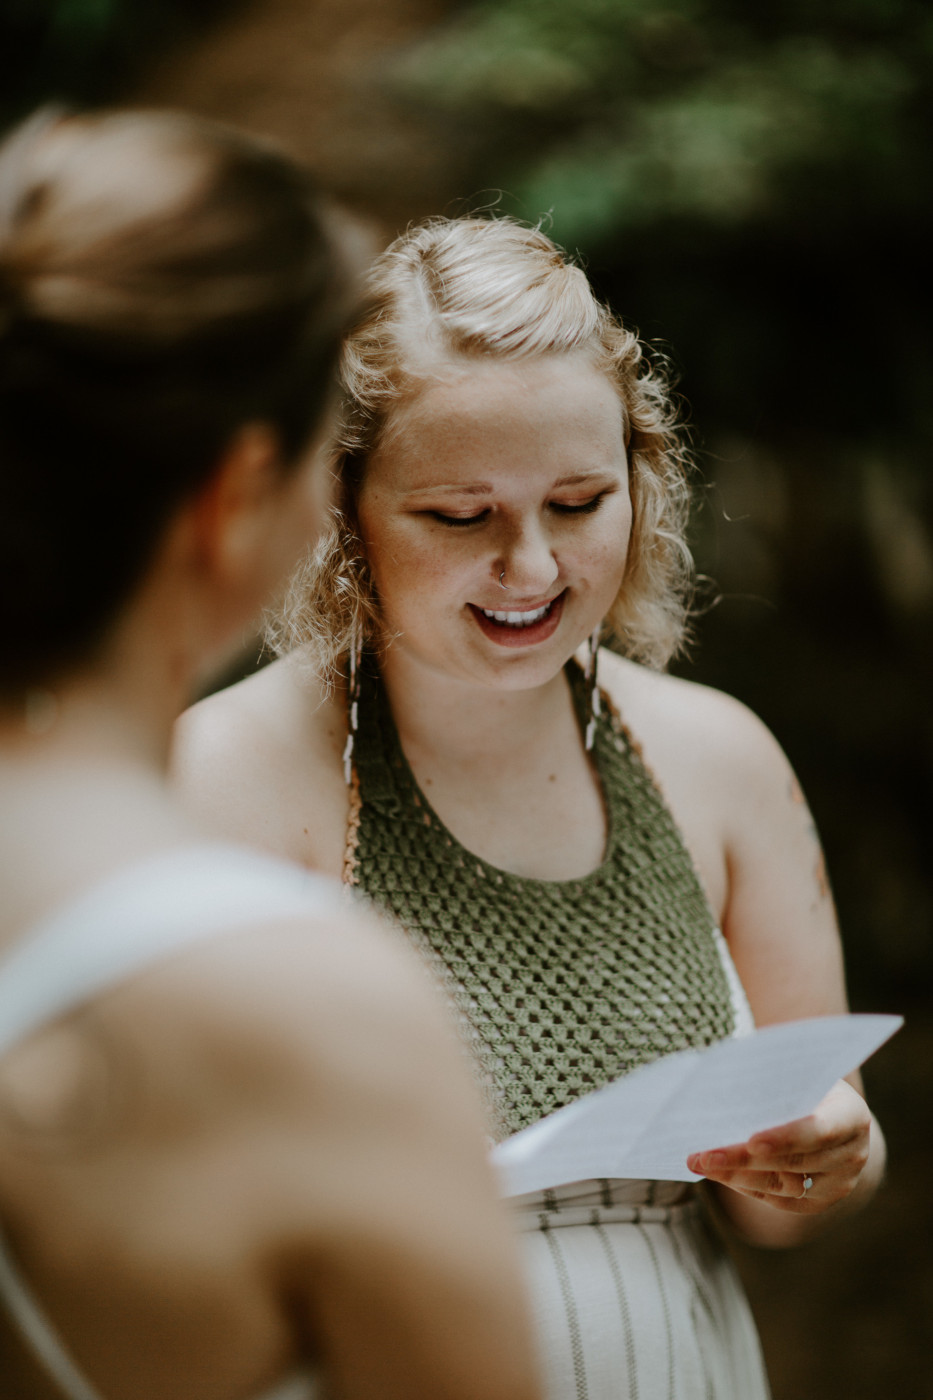 Kate reads her vows to Audrey. Elopement wedding photography at Bridal Veil Falls by Sienna Plus Josh.